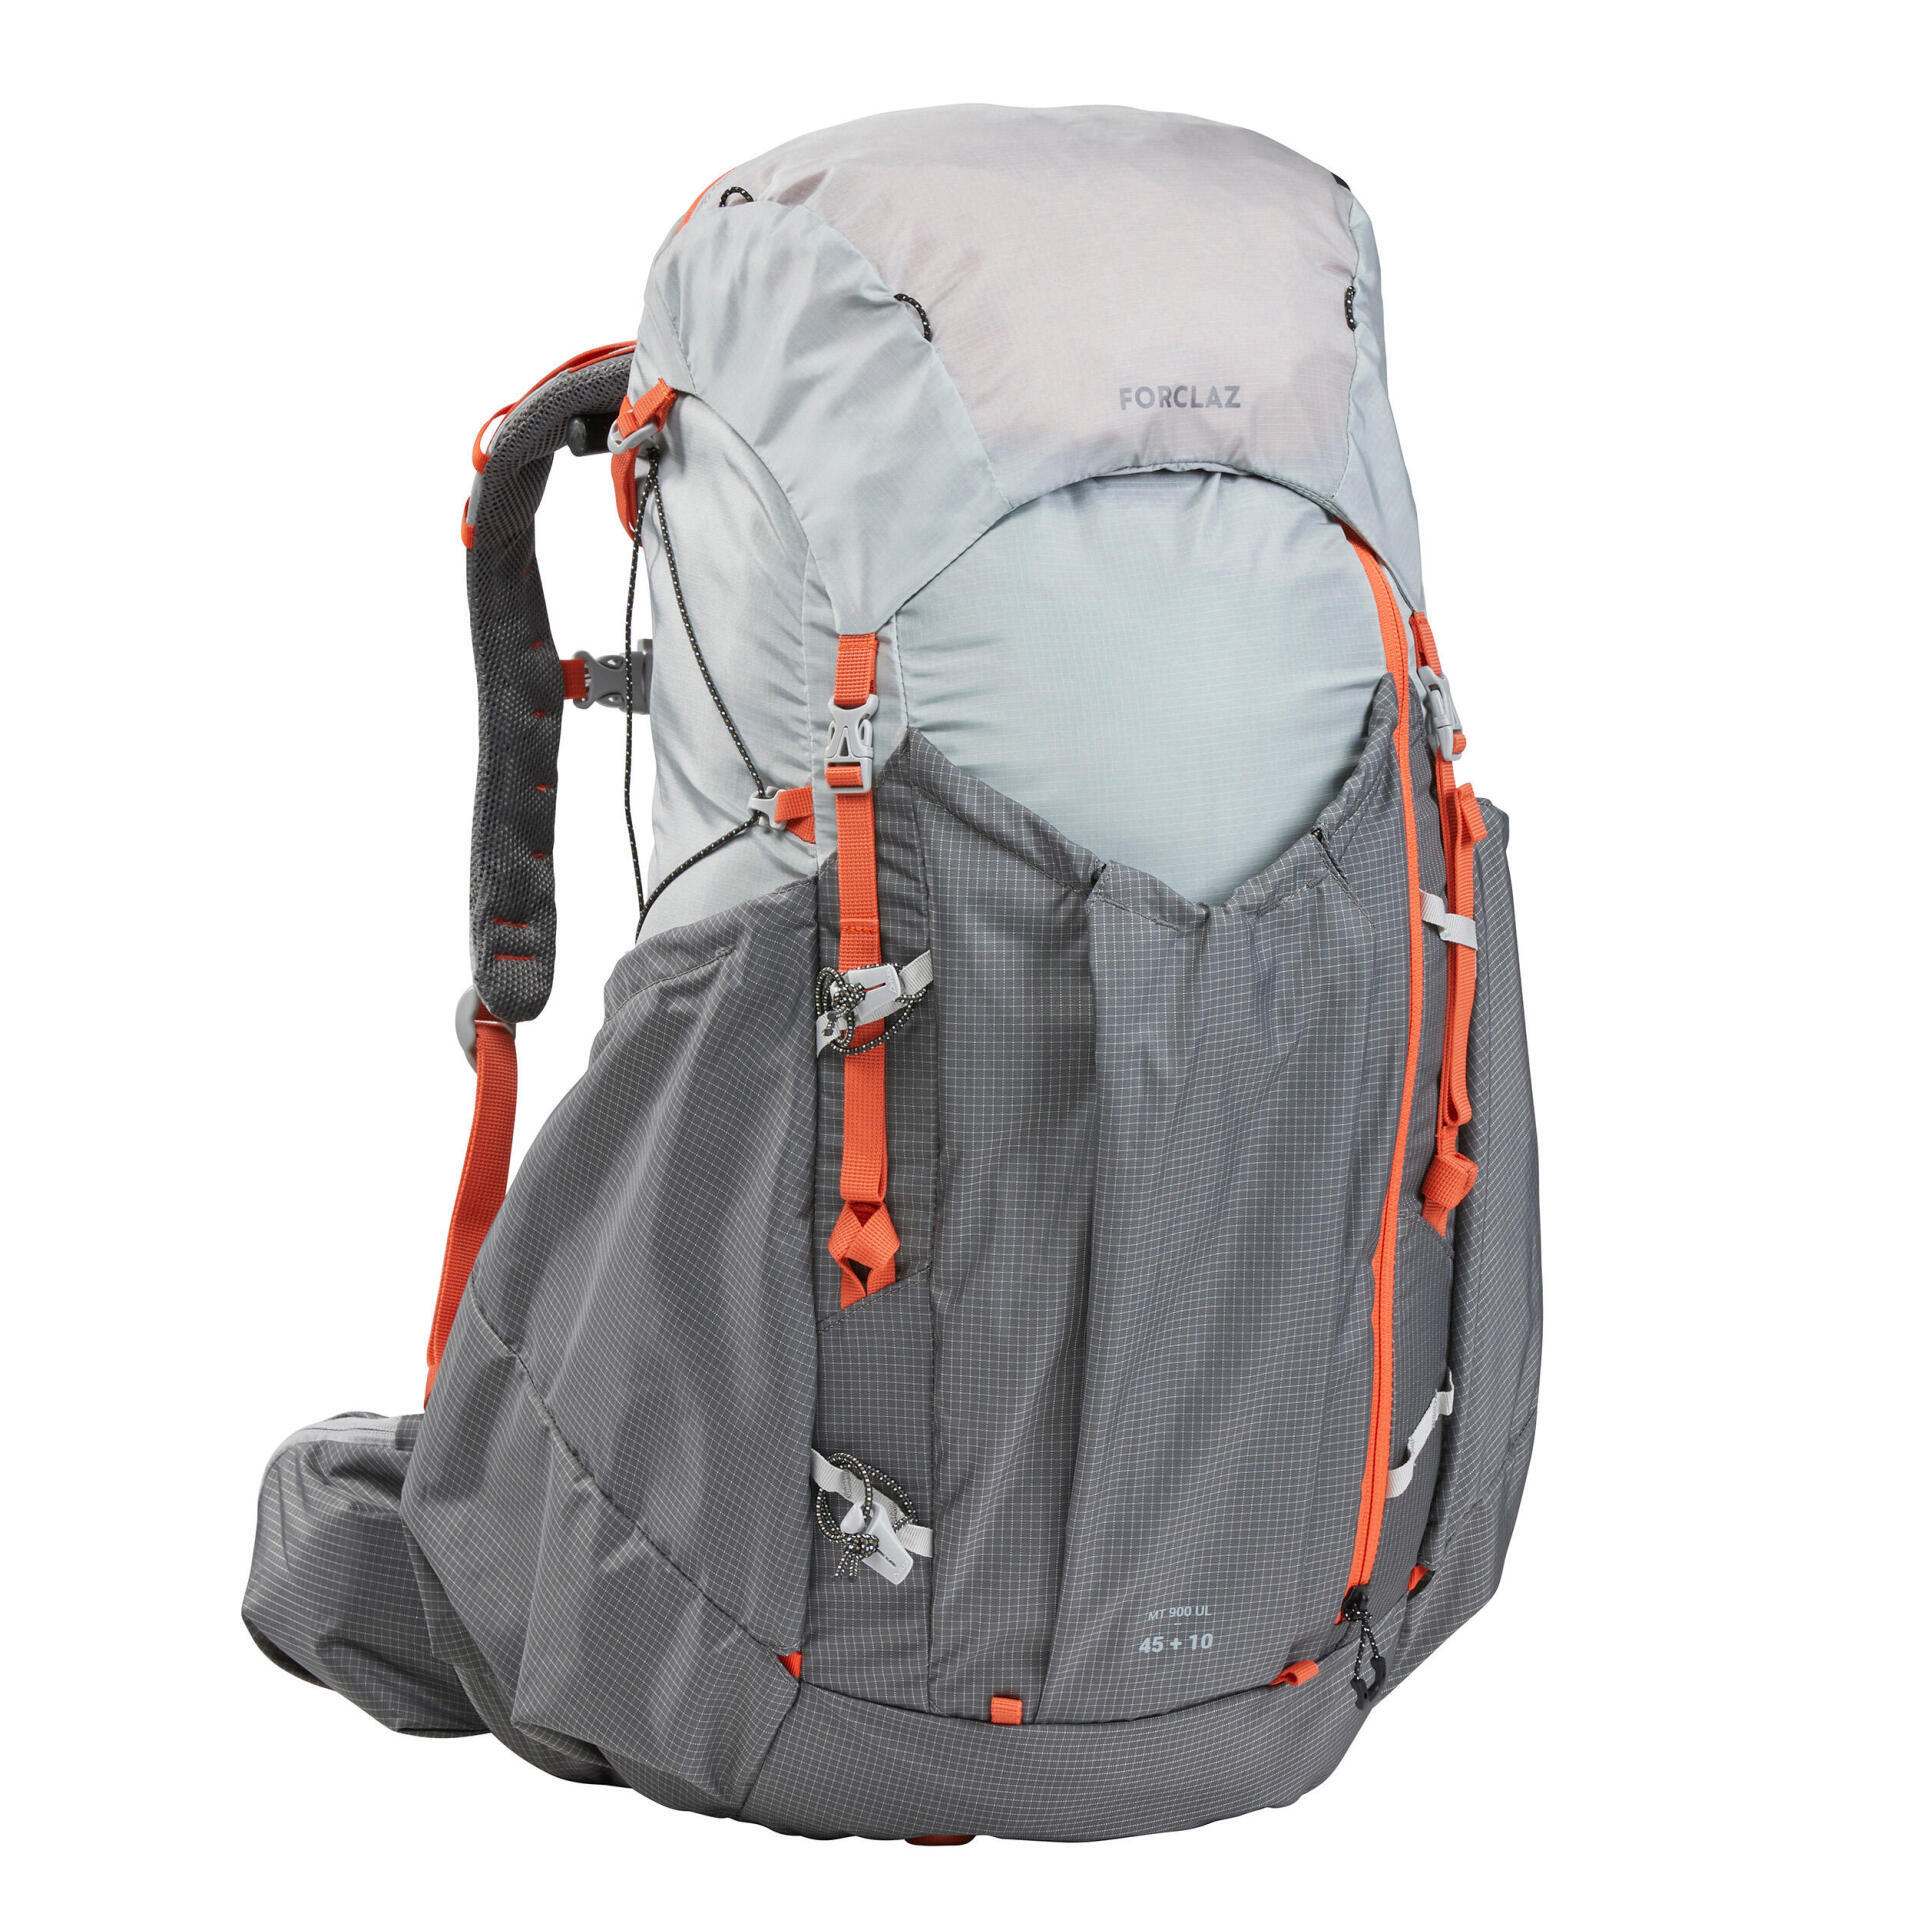 Lightweight and spacious: Which bag for a 3-day trek?